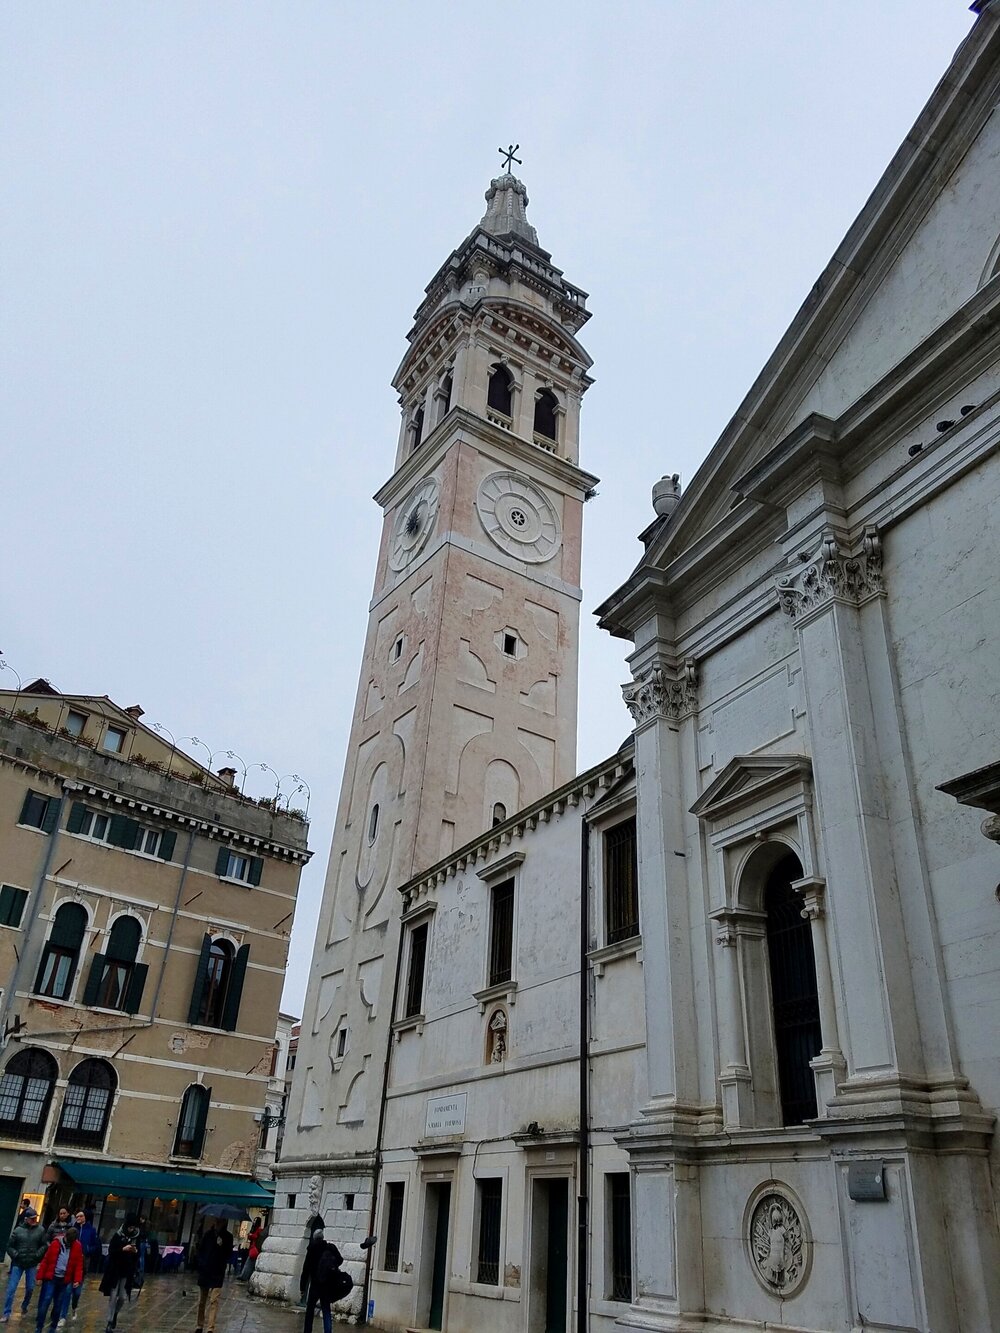 Church &amp; bell tower in Campo S. Maria Formosa